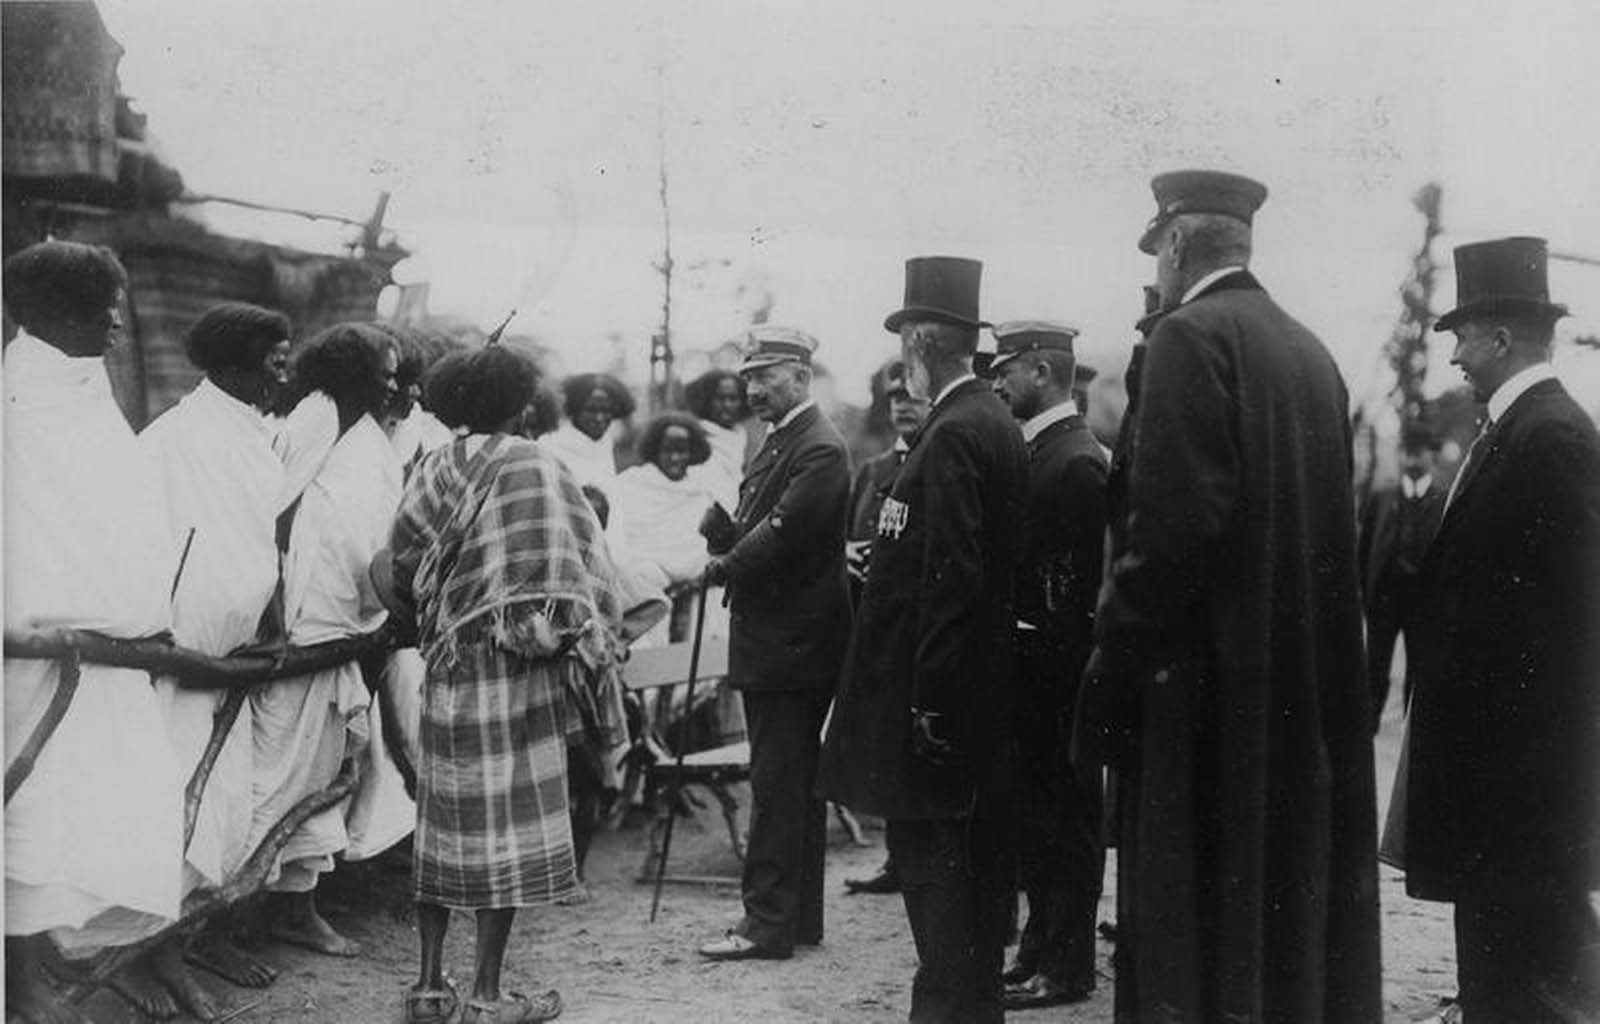 Germany’s Kaiser Wilhelm II is pictured meeting Ethiopians standing behind a wooden fence in Hamburg, Germany in 1909.